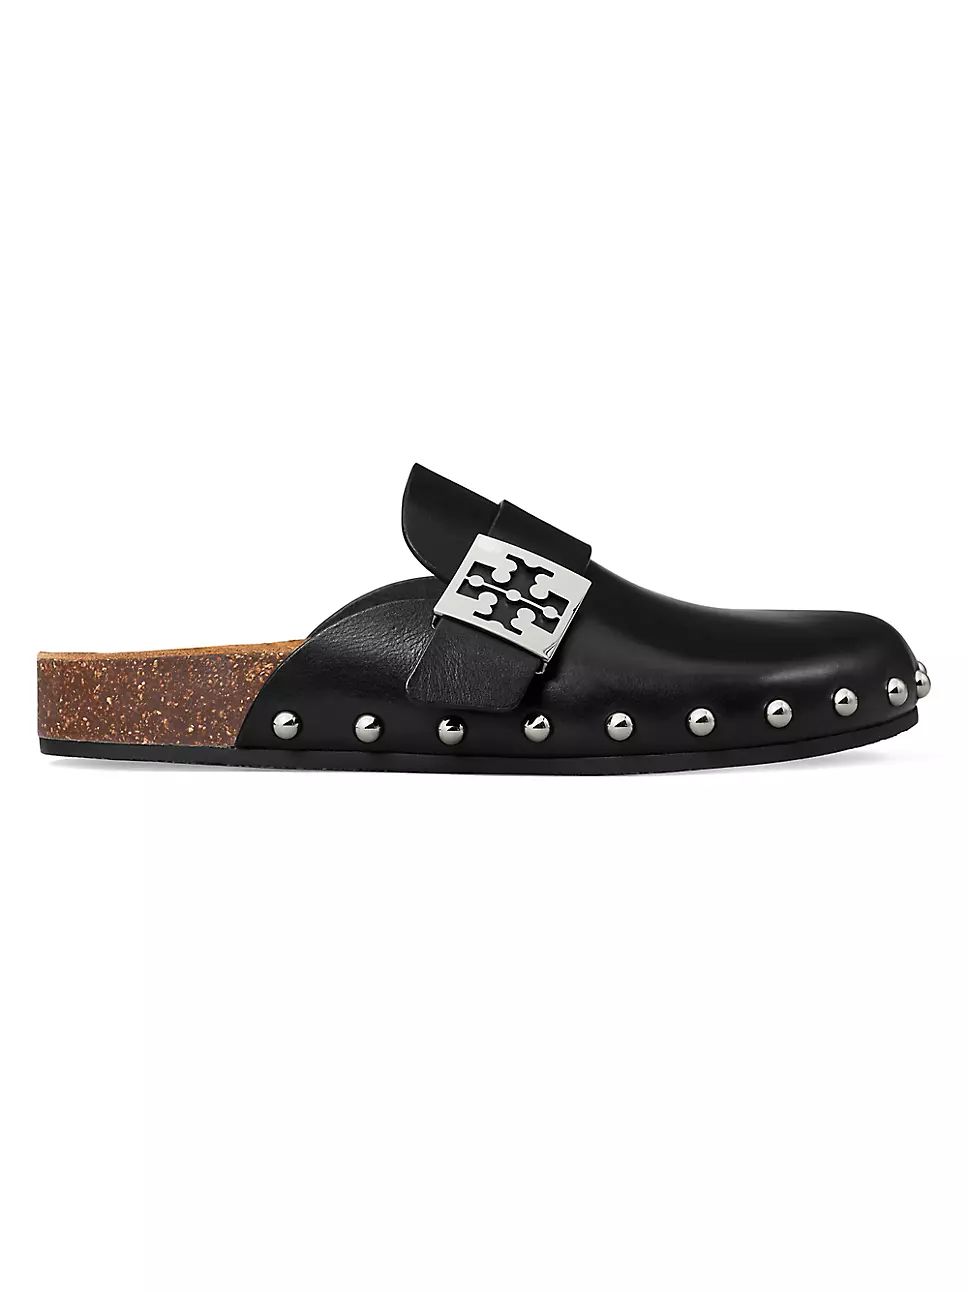 Tory Burch Mellow Suede Buckle Clogs | Saks Fifth Avenue